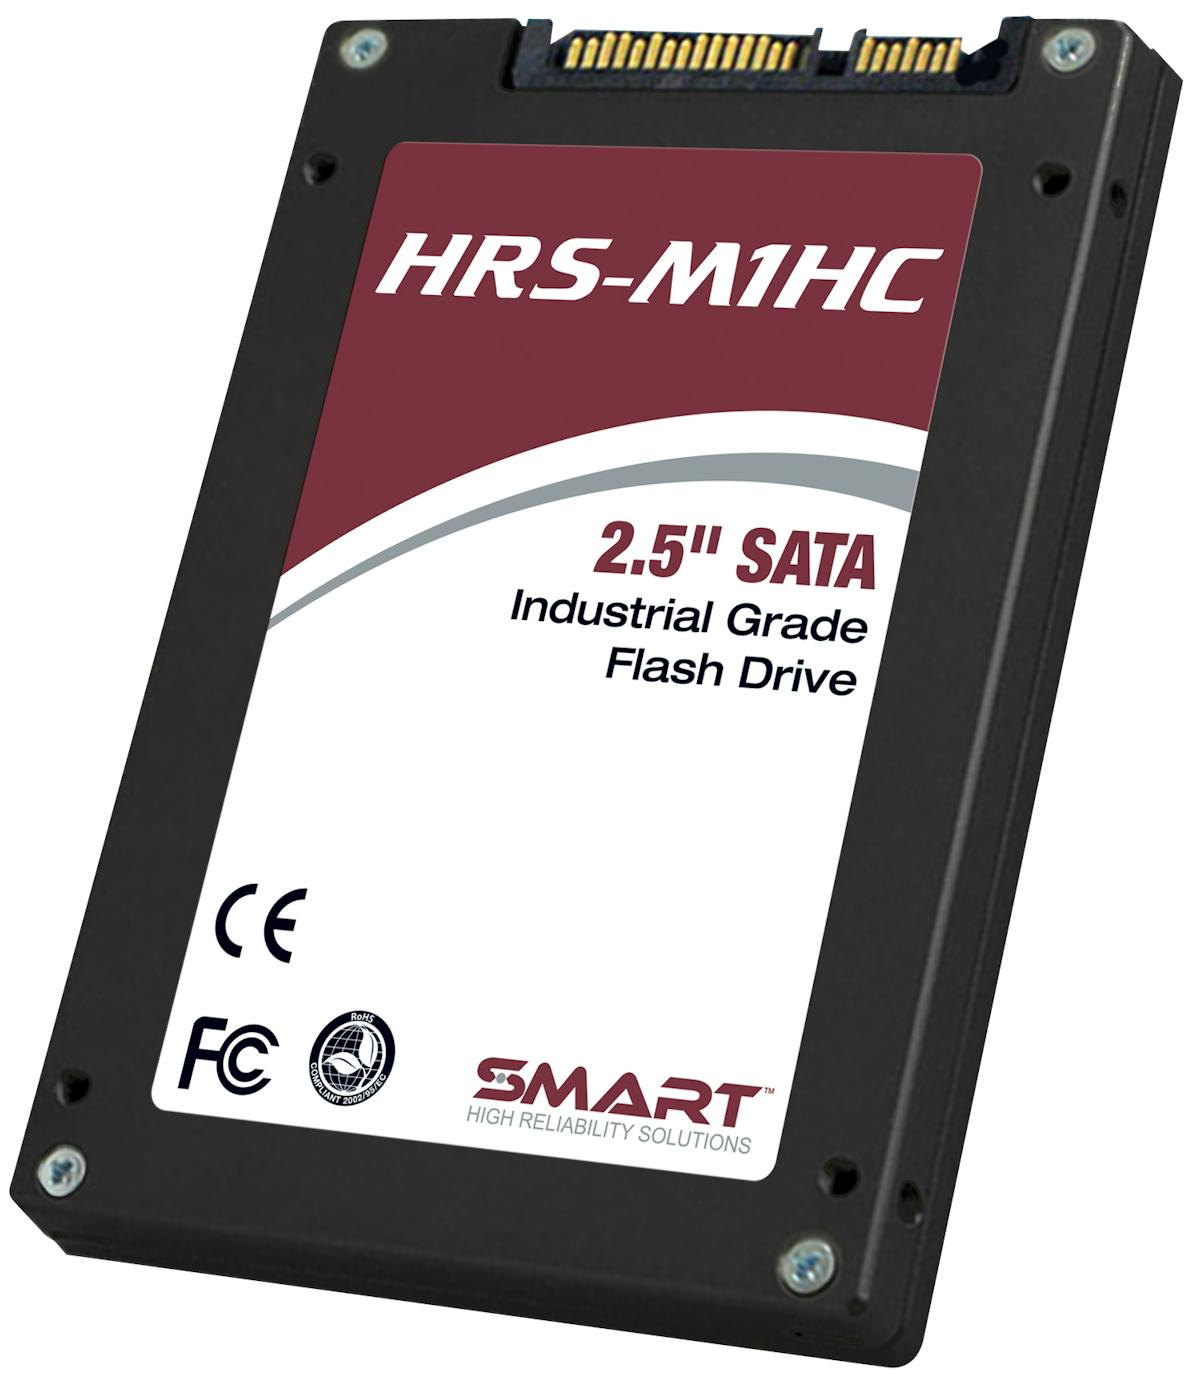 SMART&apos;s HRS-M1HC: 8TB of Rugged, Reliable, Secure Storage